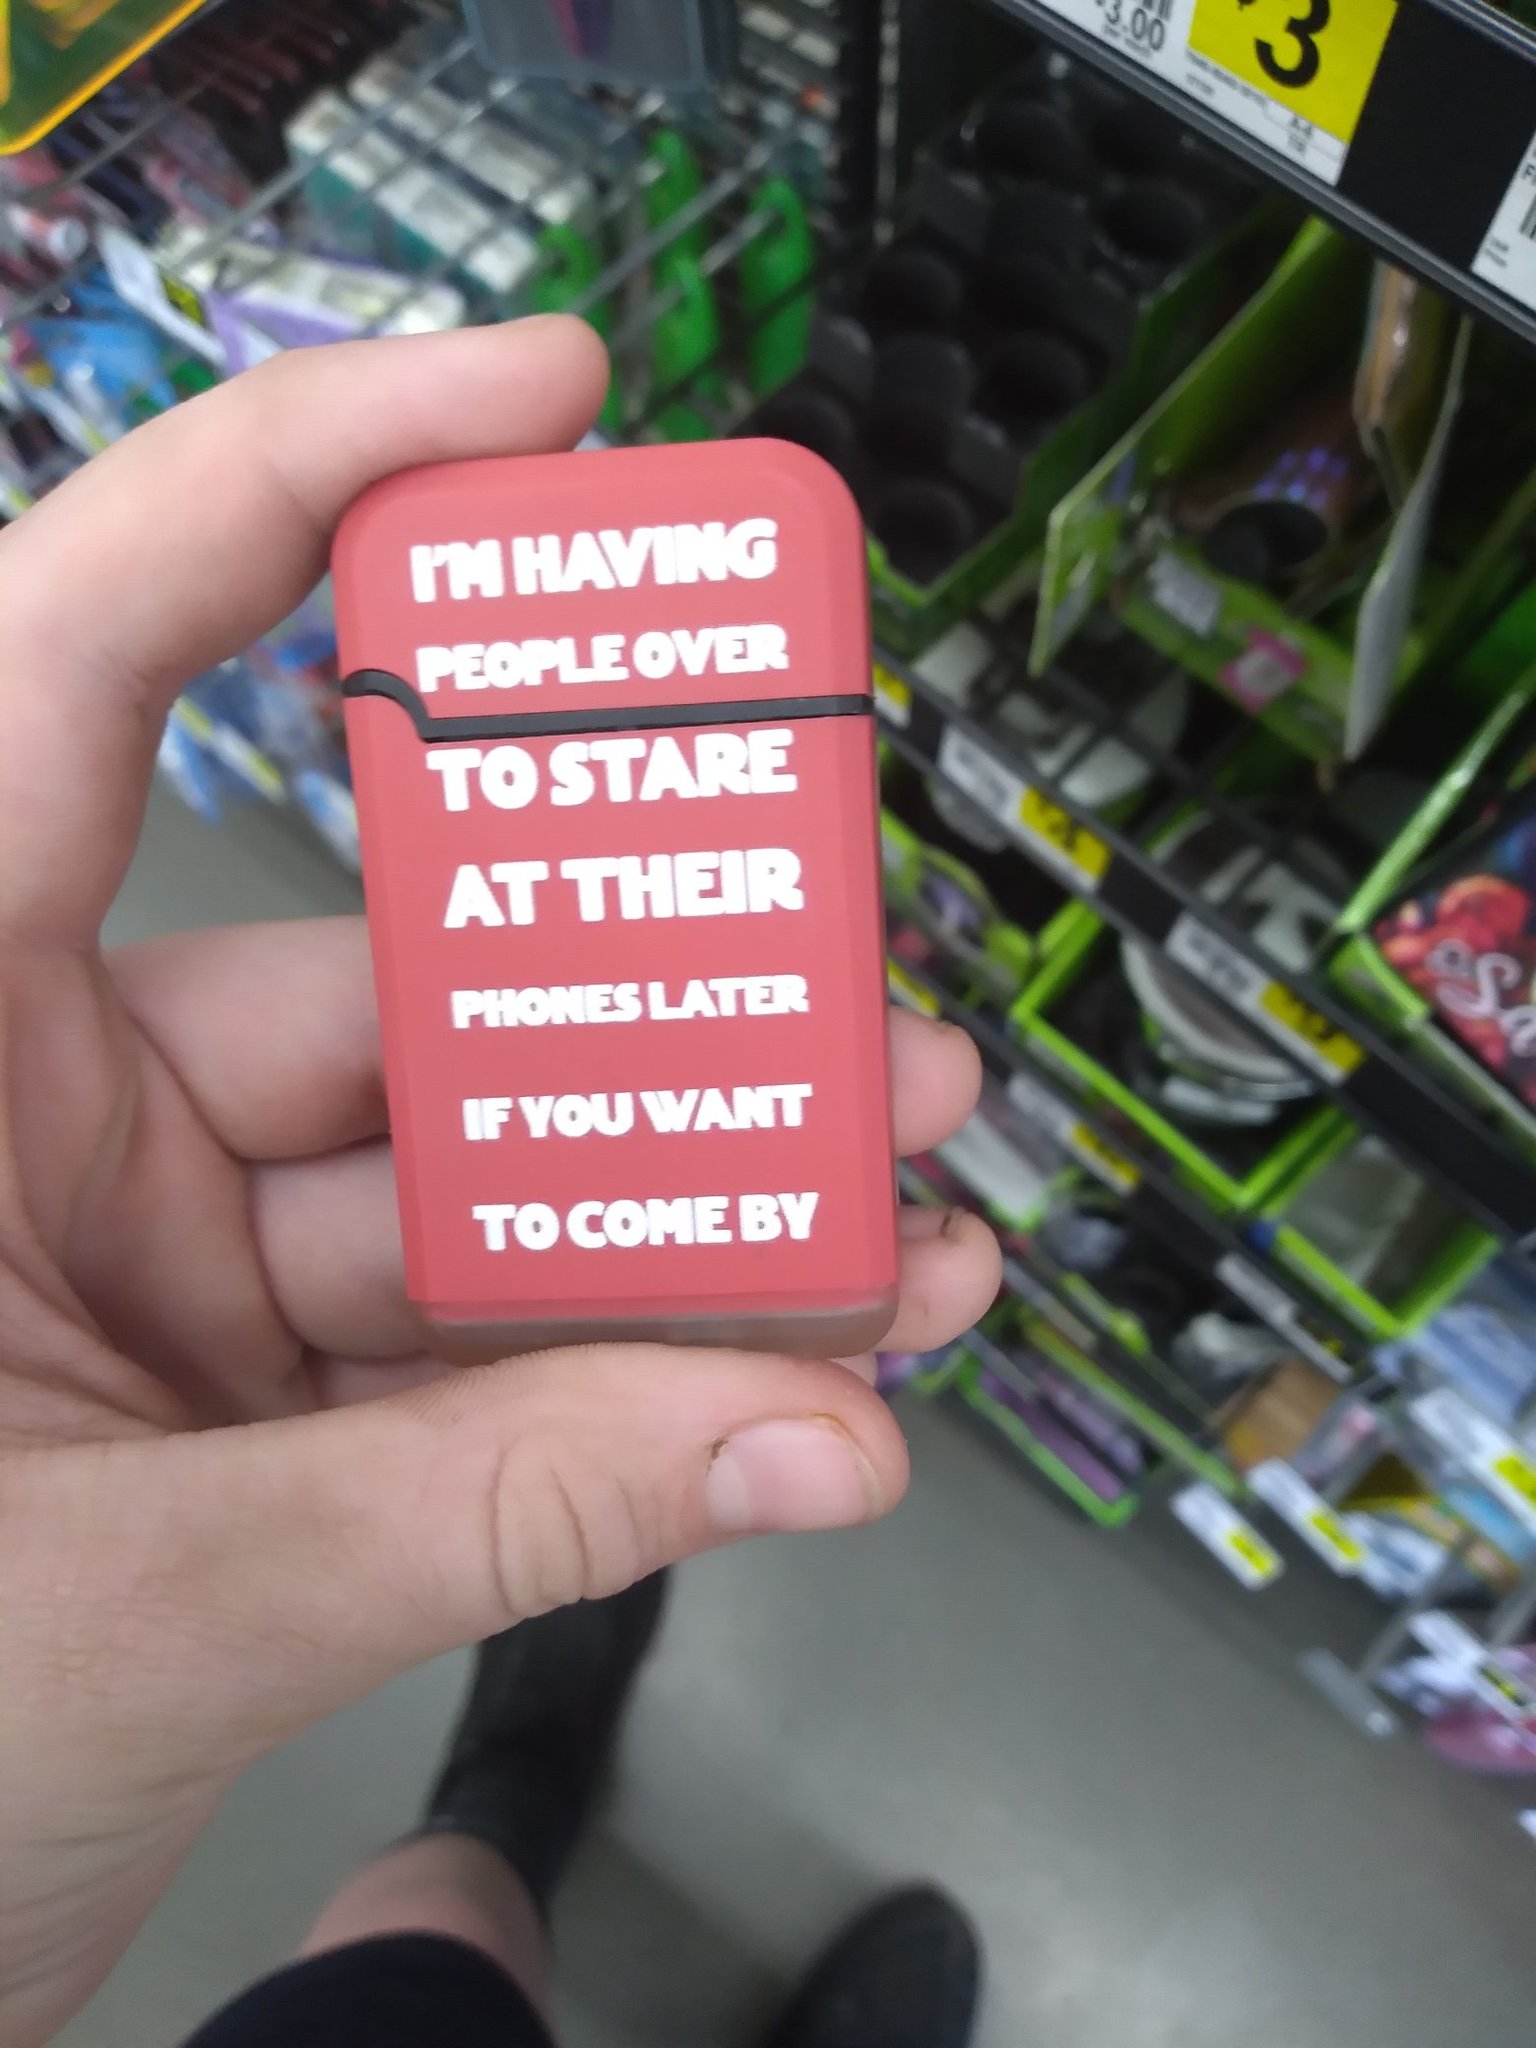 Found this in a dollar general - meme